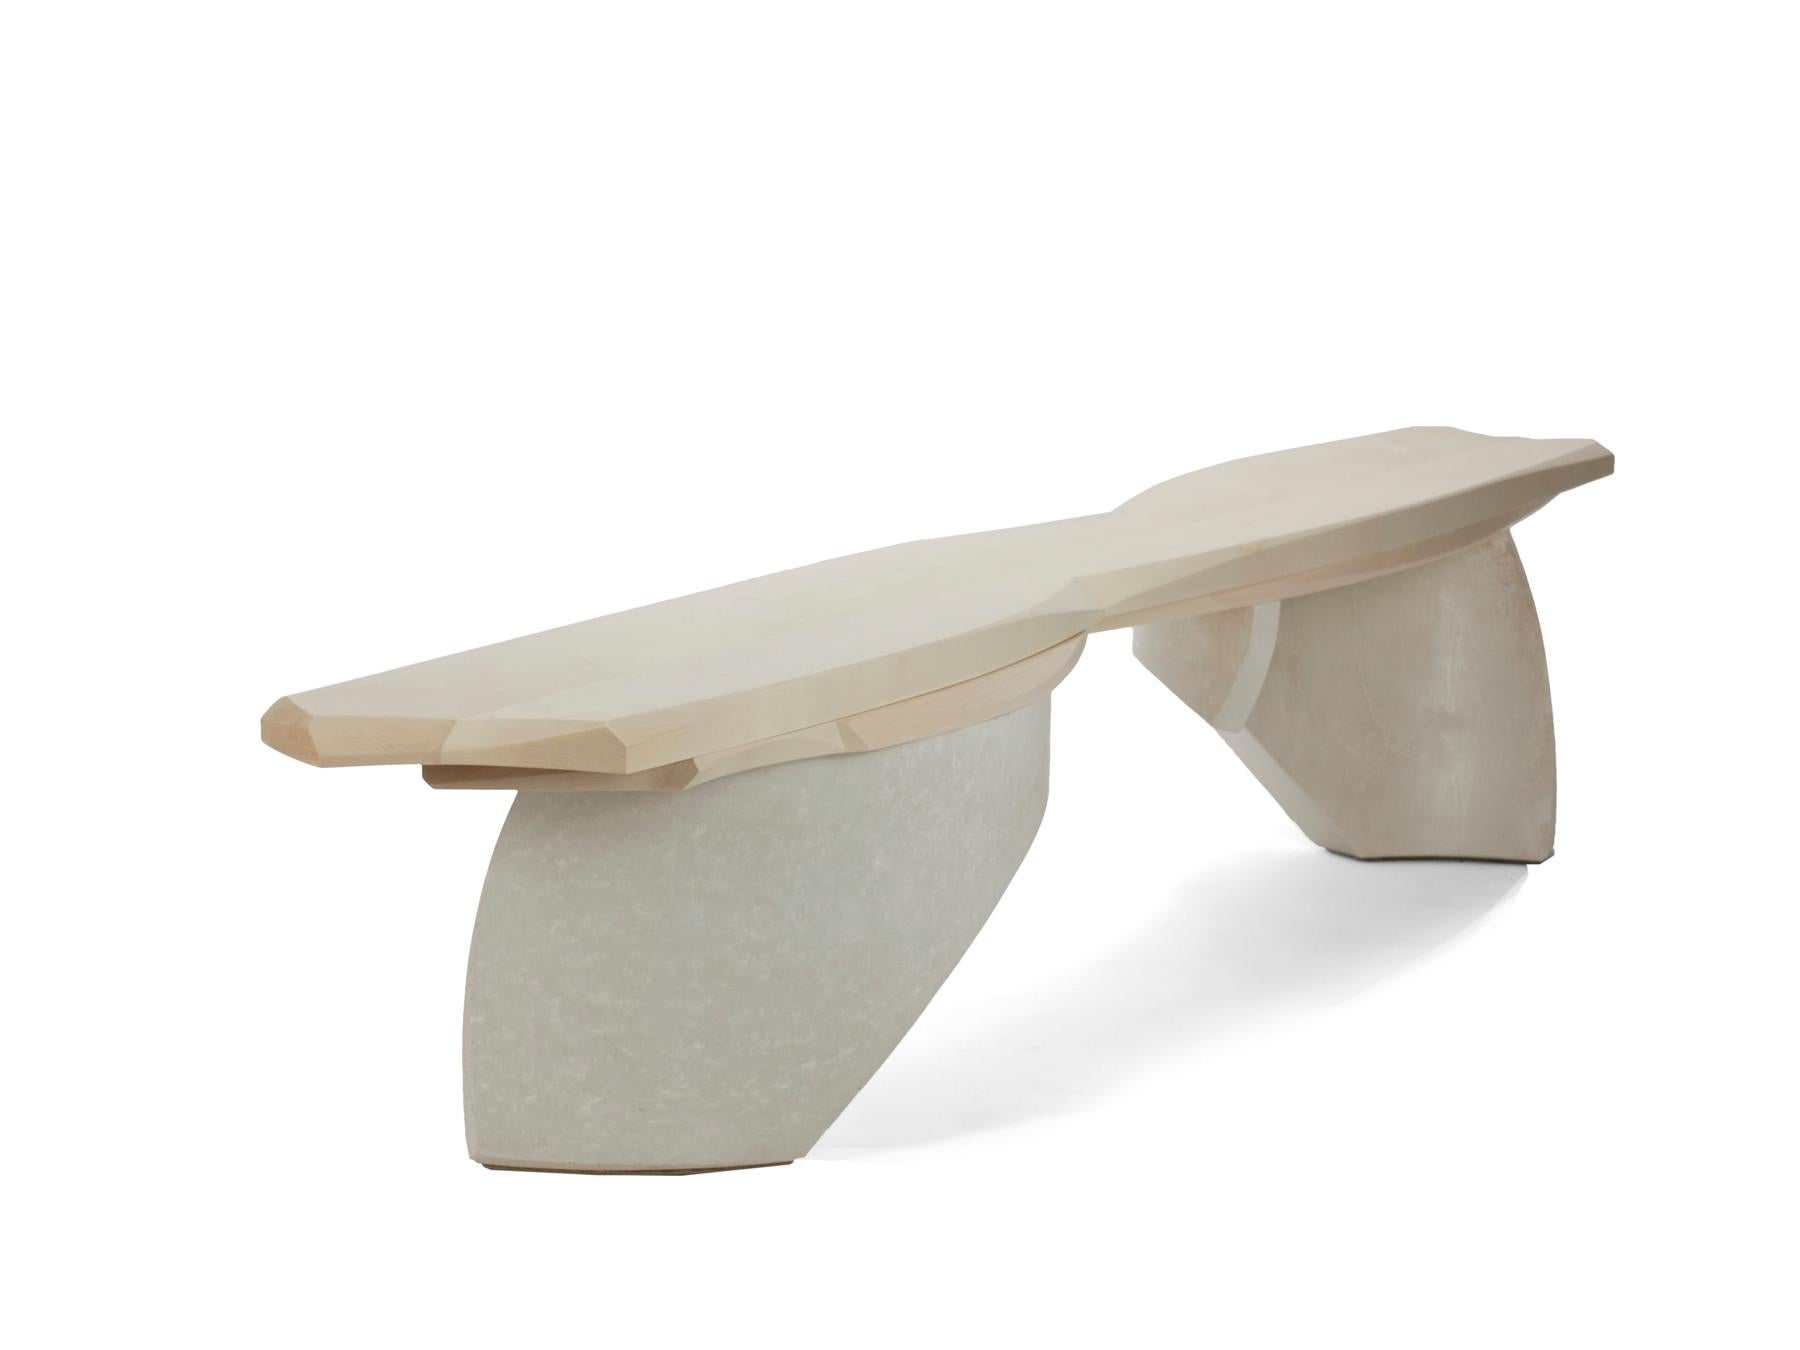 The waves bench is comprised of two curved cast concrete legs which establish the dynamic movement of the piece. The bleached maple seat is layered in reaction to that movement. The hourglass shape of the seat further enhances the movement that